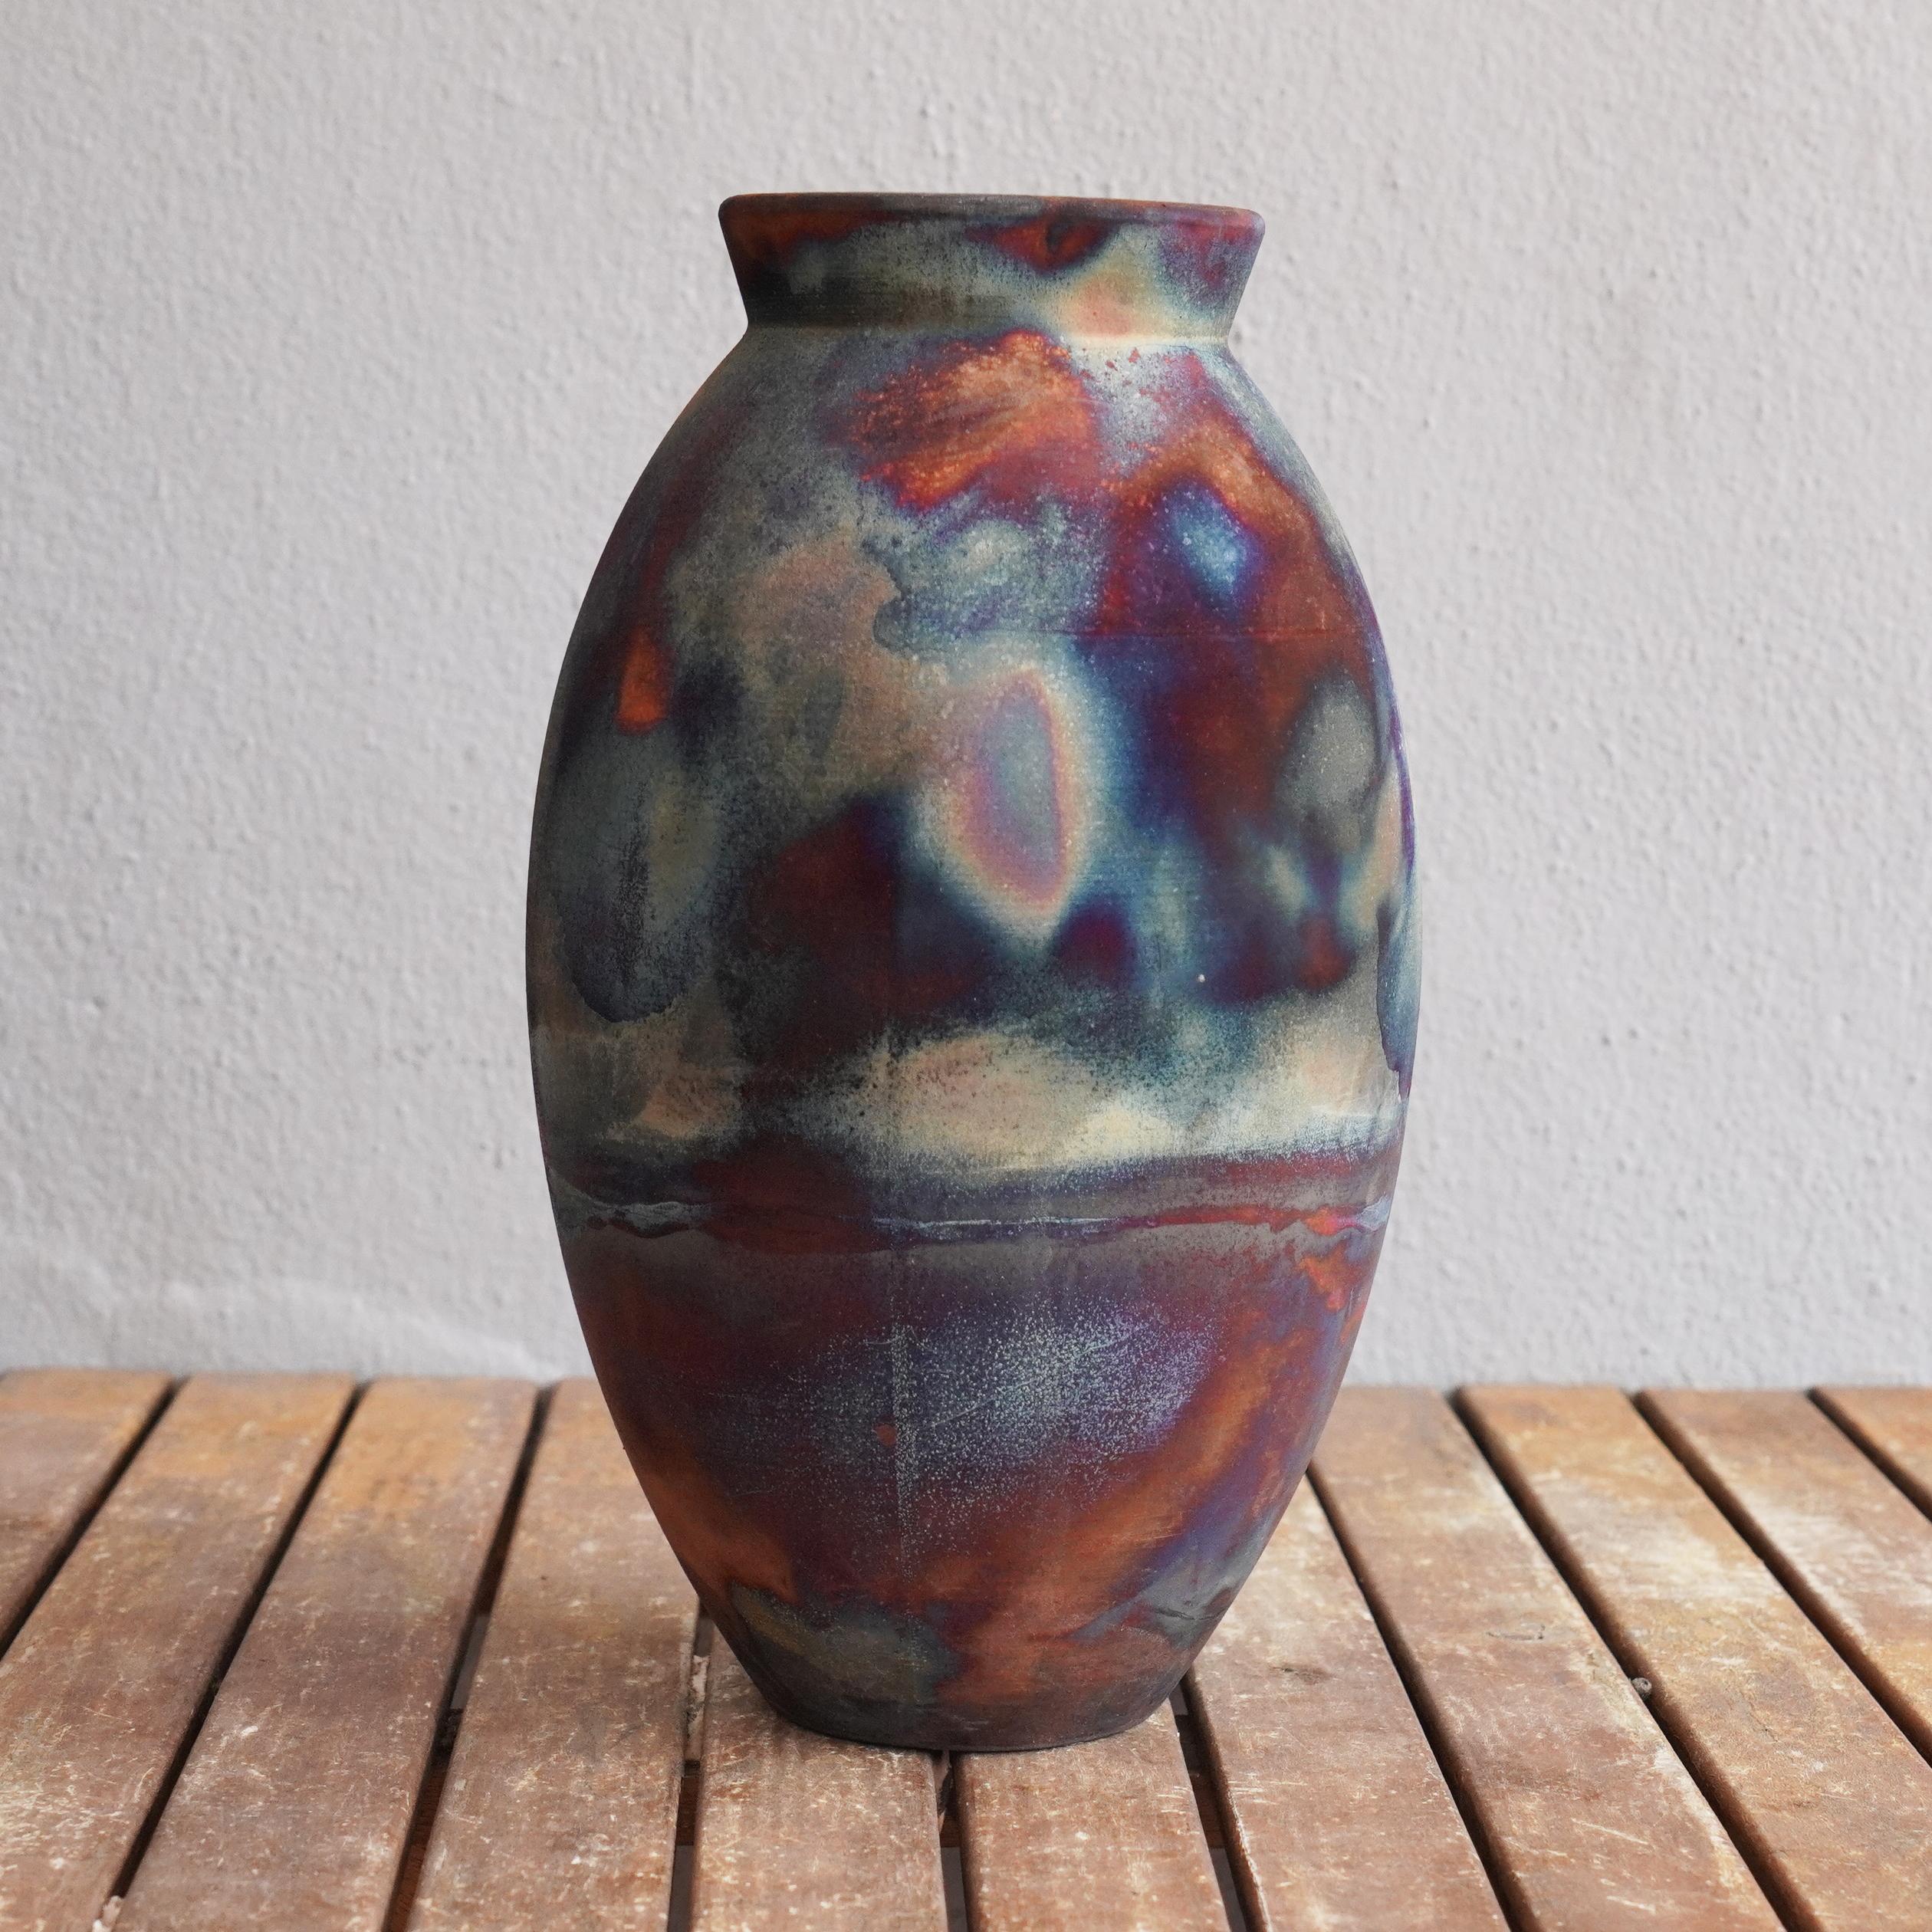 A mesmerizing sight to behold as soon as the rainbow-like patinas catch your eye. The Oval Vase is a tall, teardrop-shaped design best for adding a touch of elegance and intrigue to an interior space. Made using the Raku technique, it easily becomes